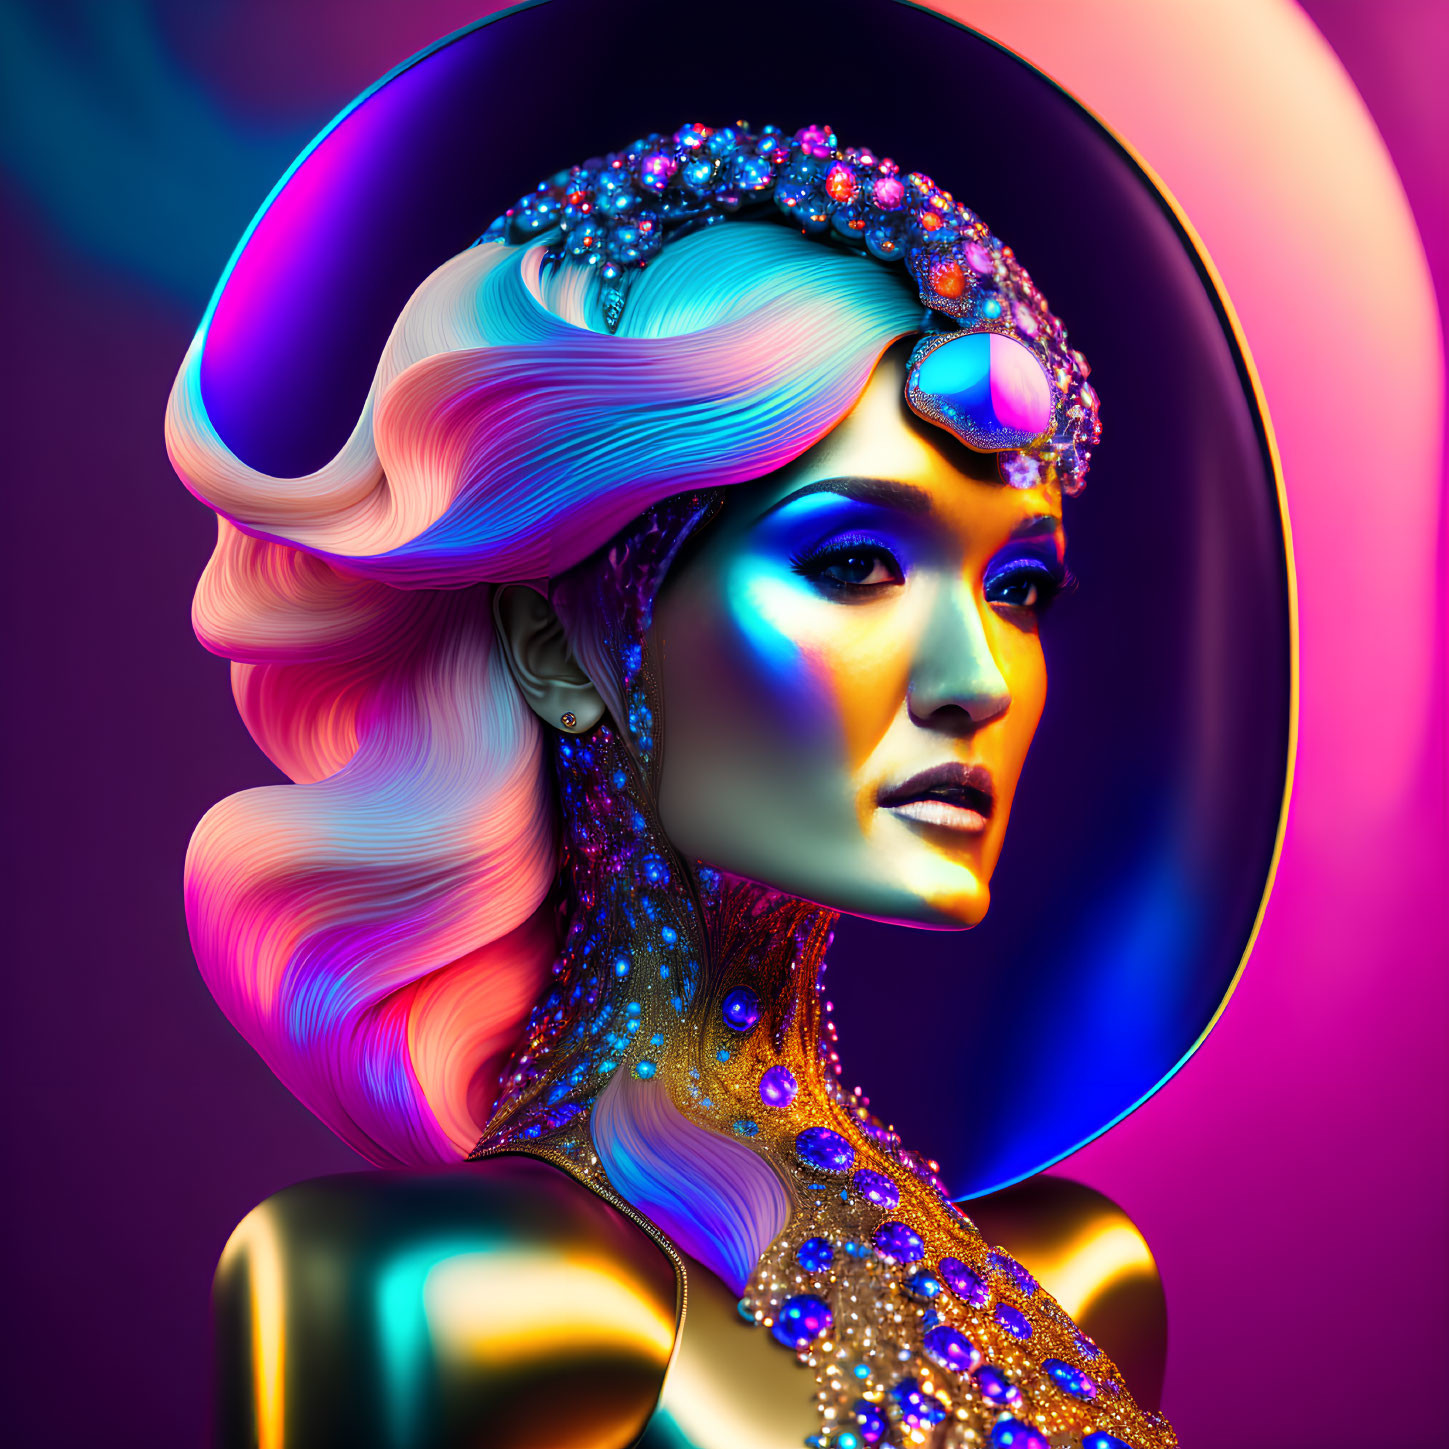 Colorful wavy hair and intricate jewelry on a woman in neon-lit digital portrait